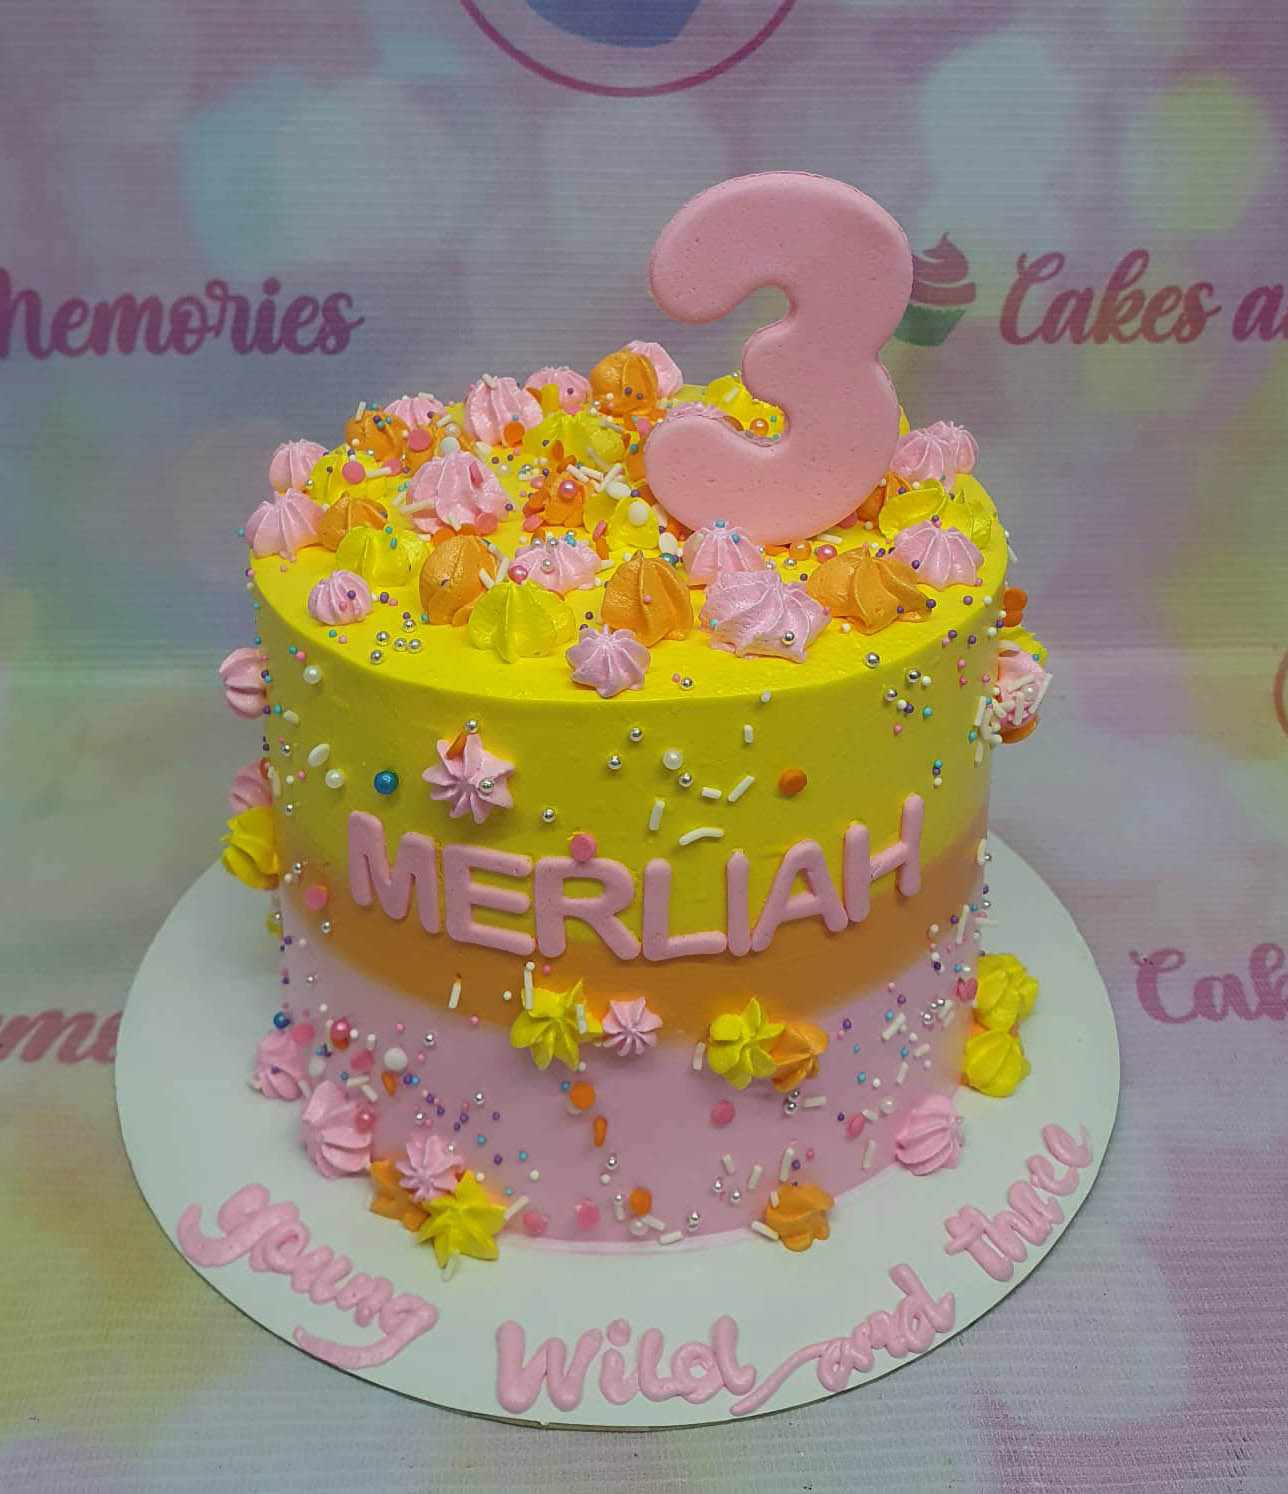 This custom decorated Candyland Cake is a 1 layer, 1 tier cake with colorful candy sprinkles, orange, pink, yellow, and Young Wild and Three.